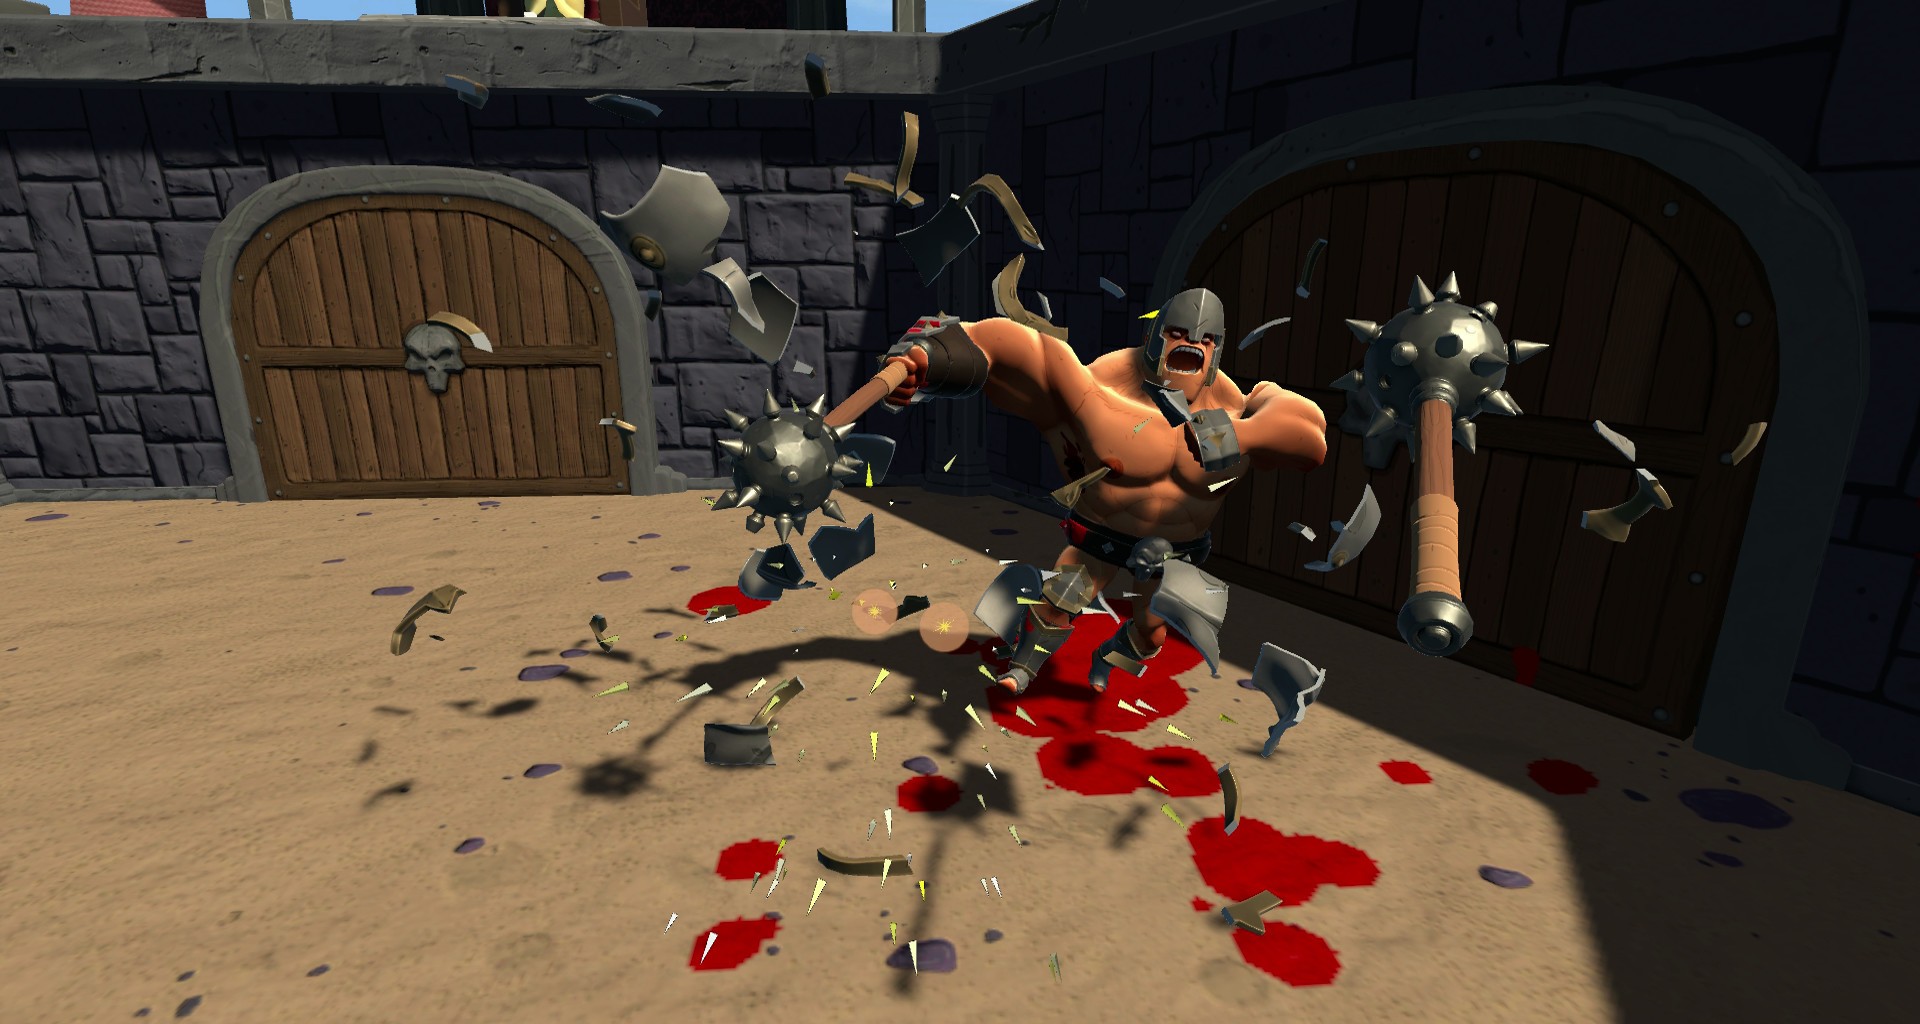 Gorn game with vr set